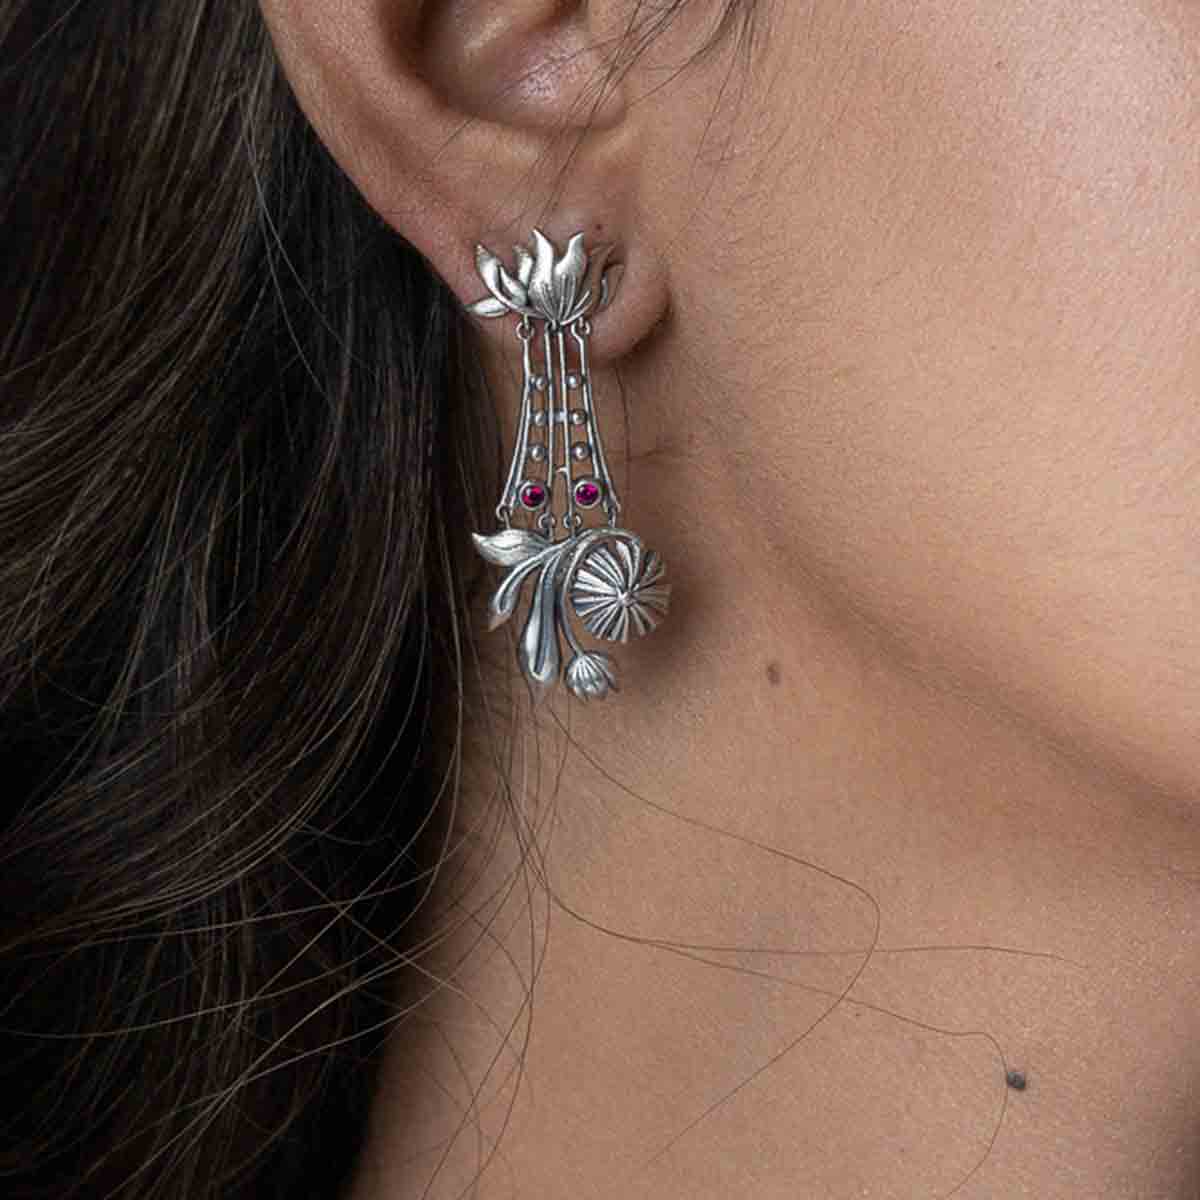 William Morris - Rising Lilly Silver Earrings by Moha